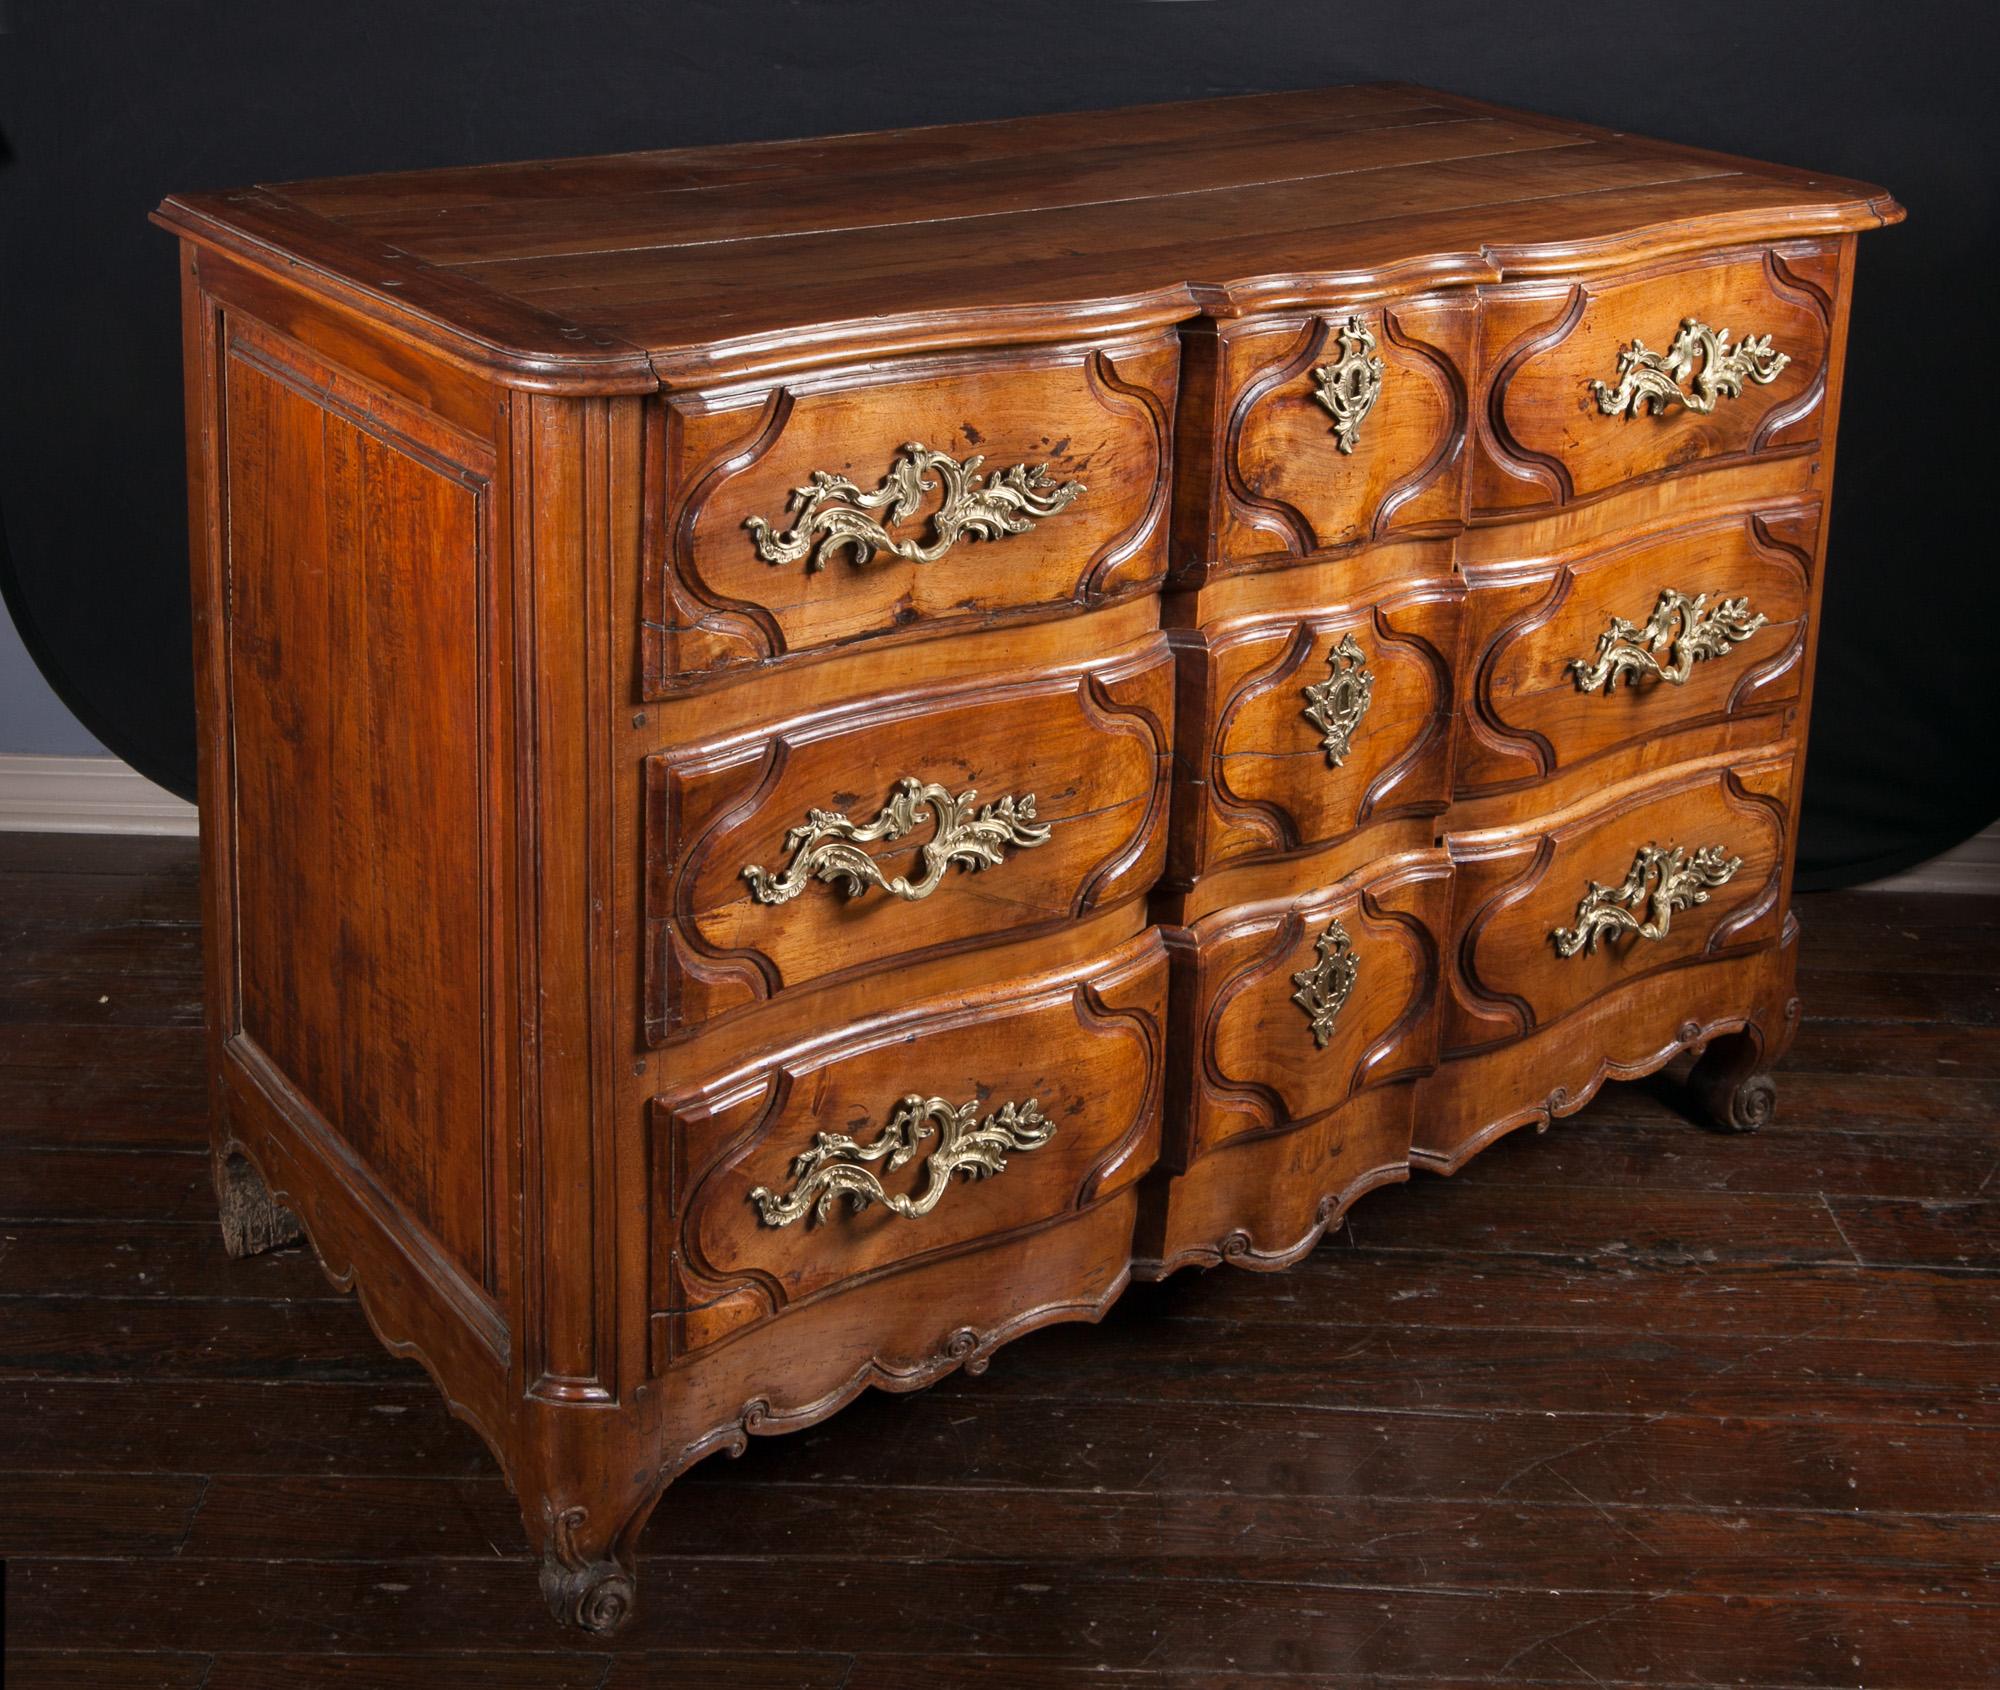 This 18th century Lyonnaise commode is simply exquisite. The piece is made of walnut in the Regence in style and features three drawers, all with the original bronze d’ore handles and escutcheons. The walnut top is contoured beautifully, and the